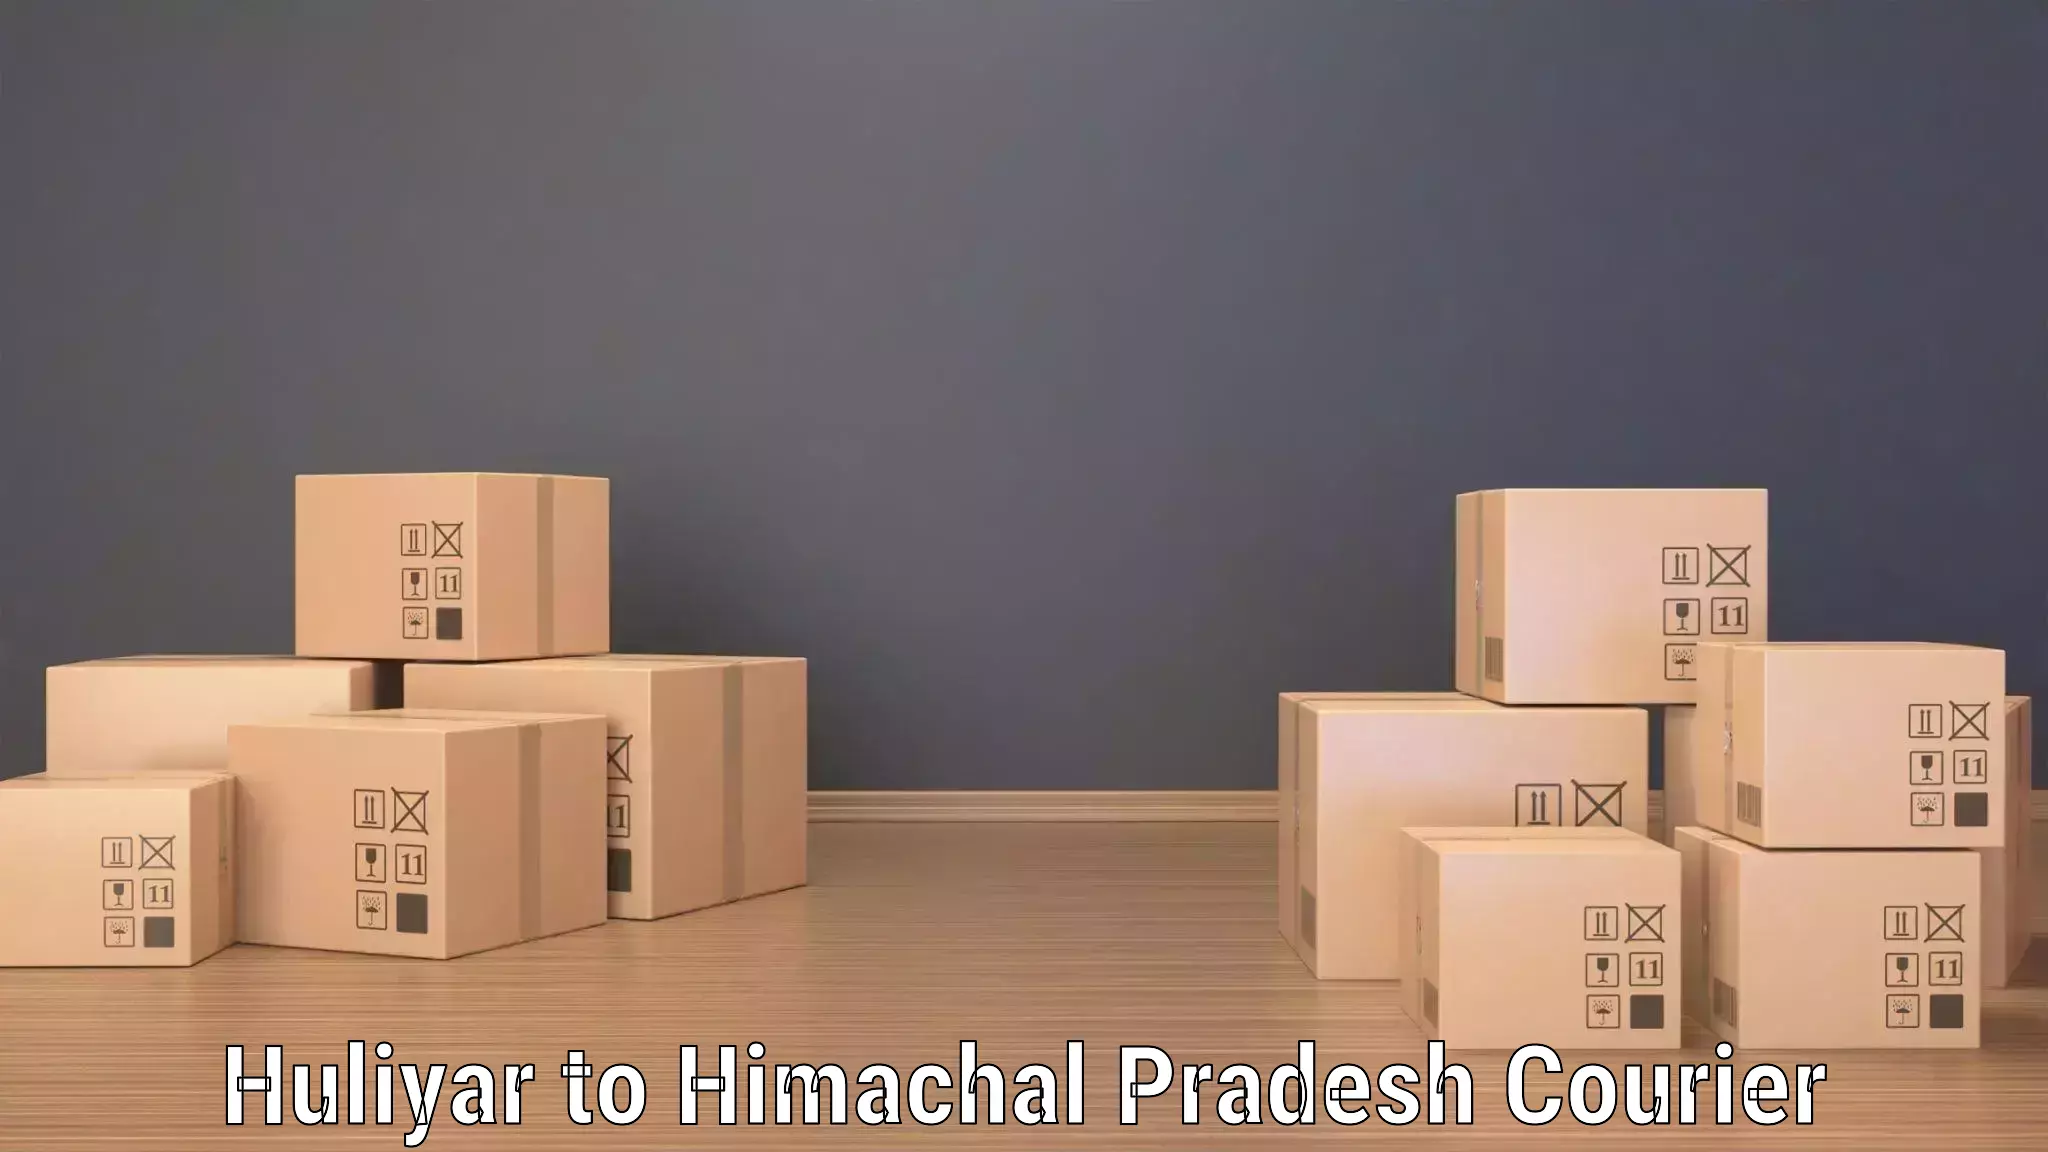 Cash on delivery service in Huliyar to Dharamshala